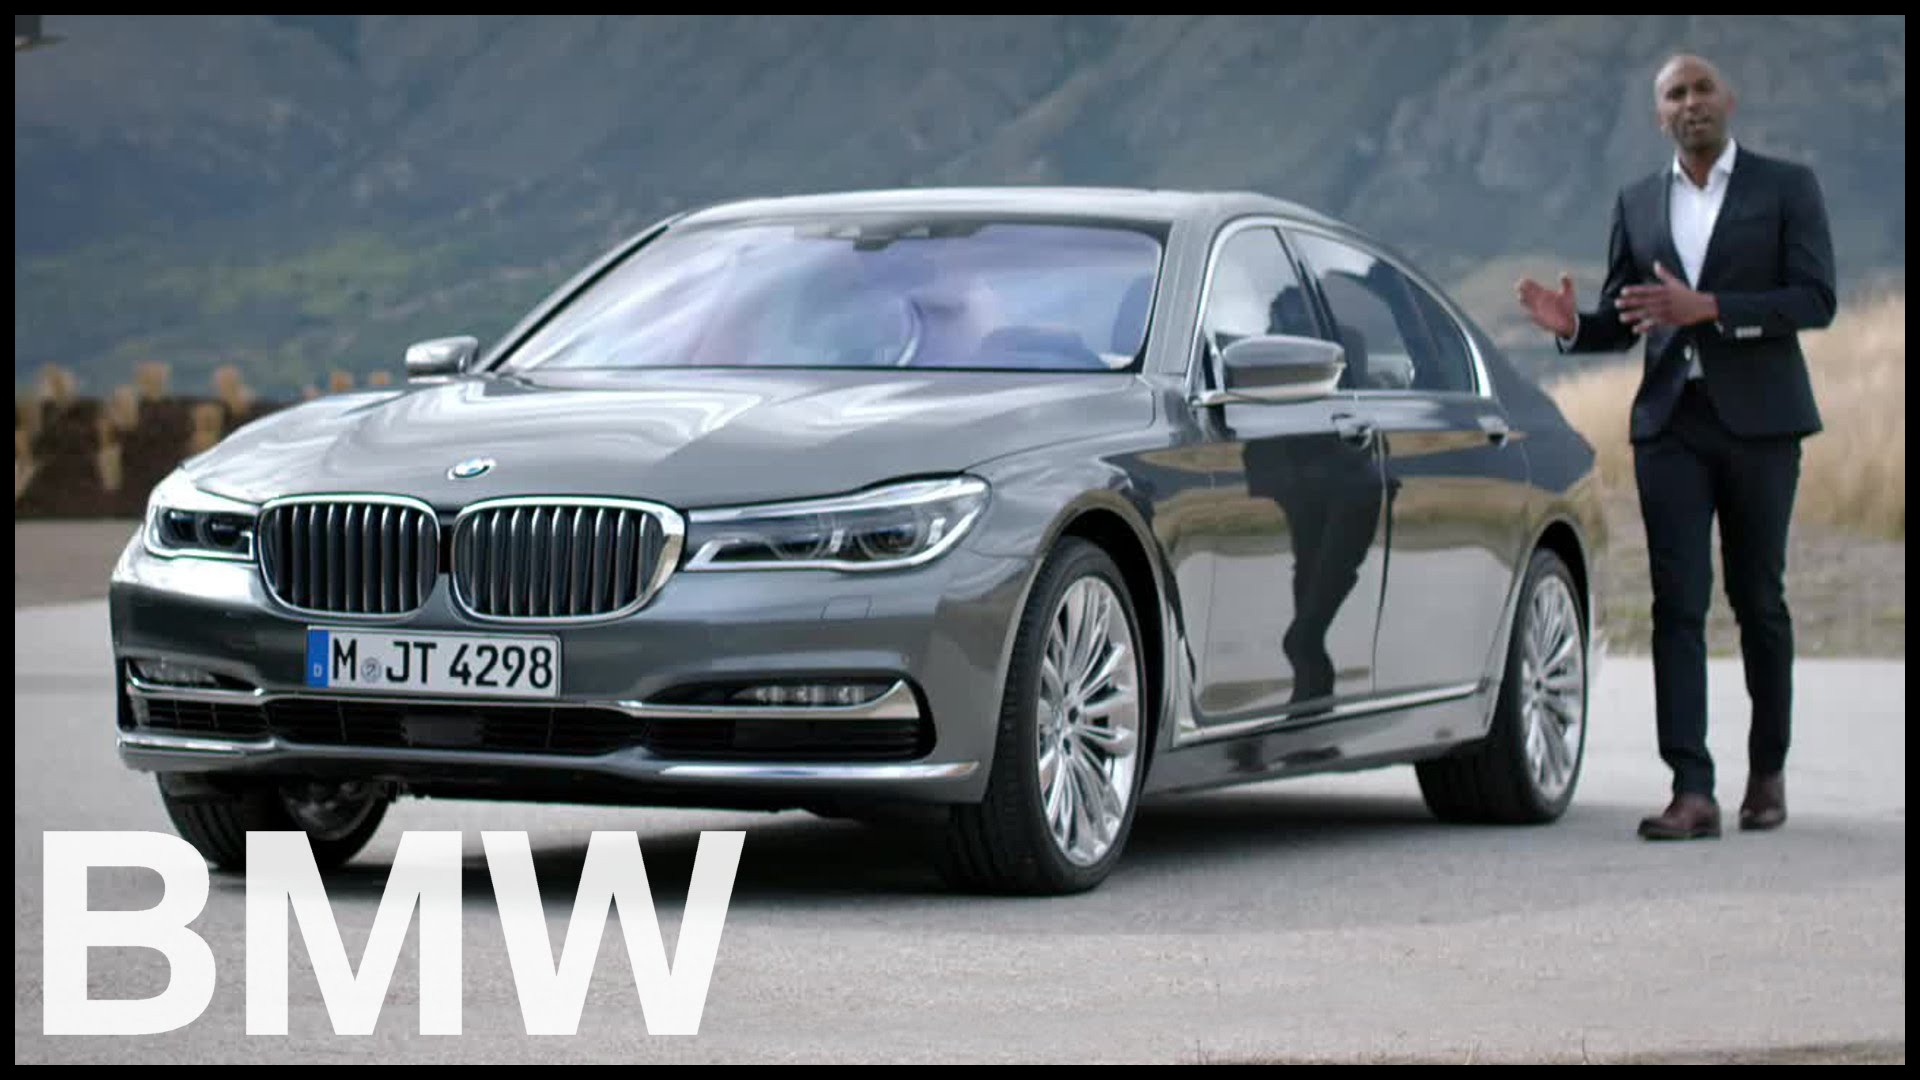 New Bmw Models In 2019 Unique the All New Bmw 7 Series All You Need to